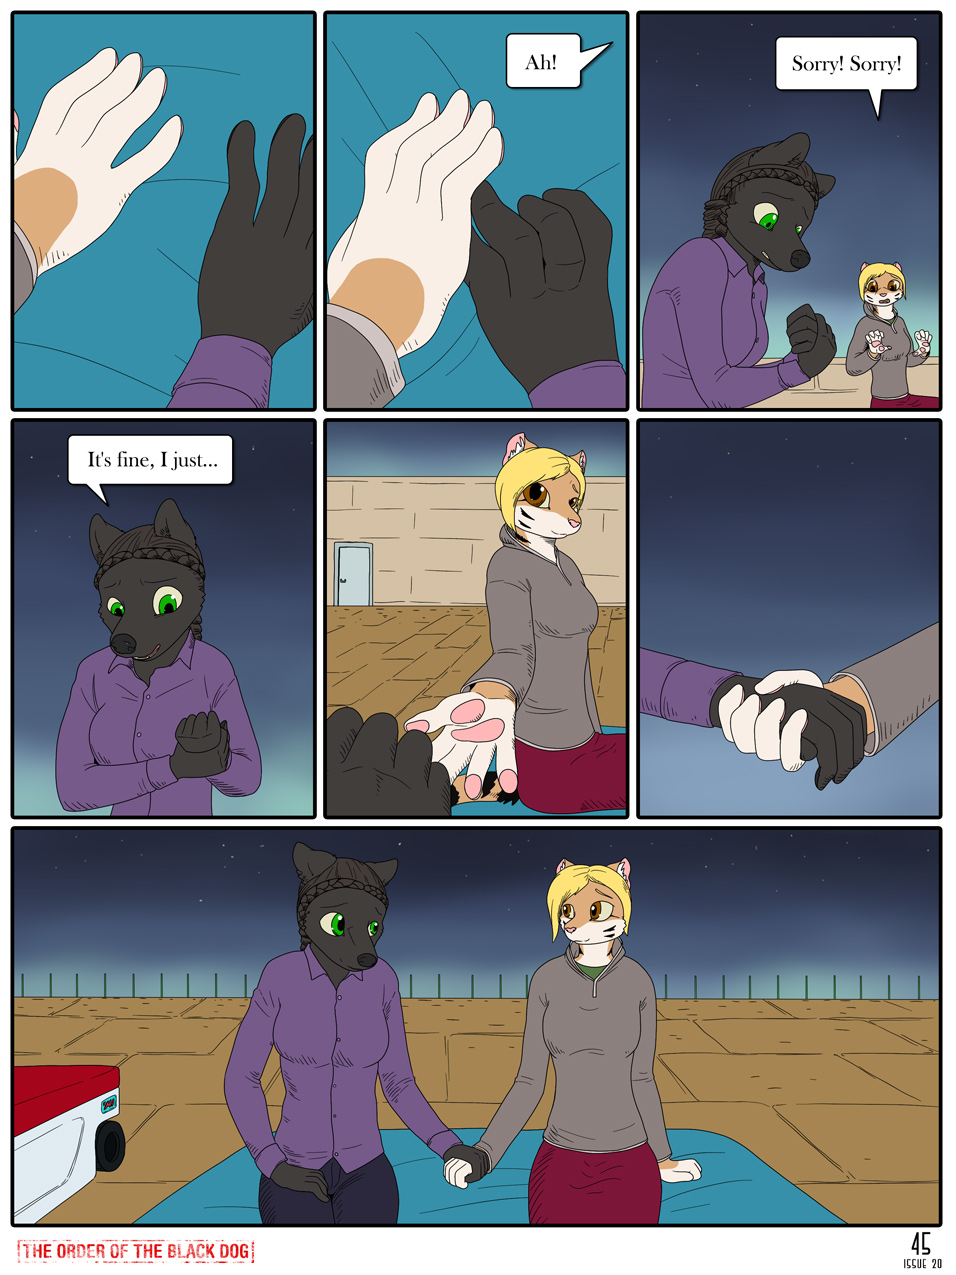 Issue 20, Page 45